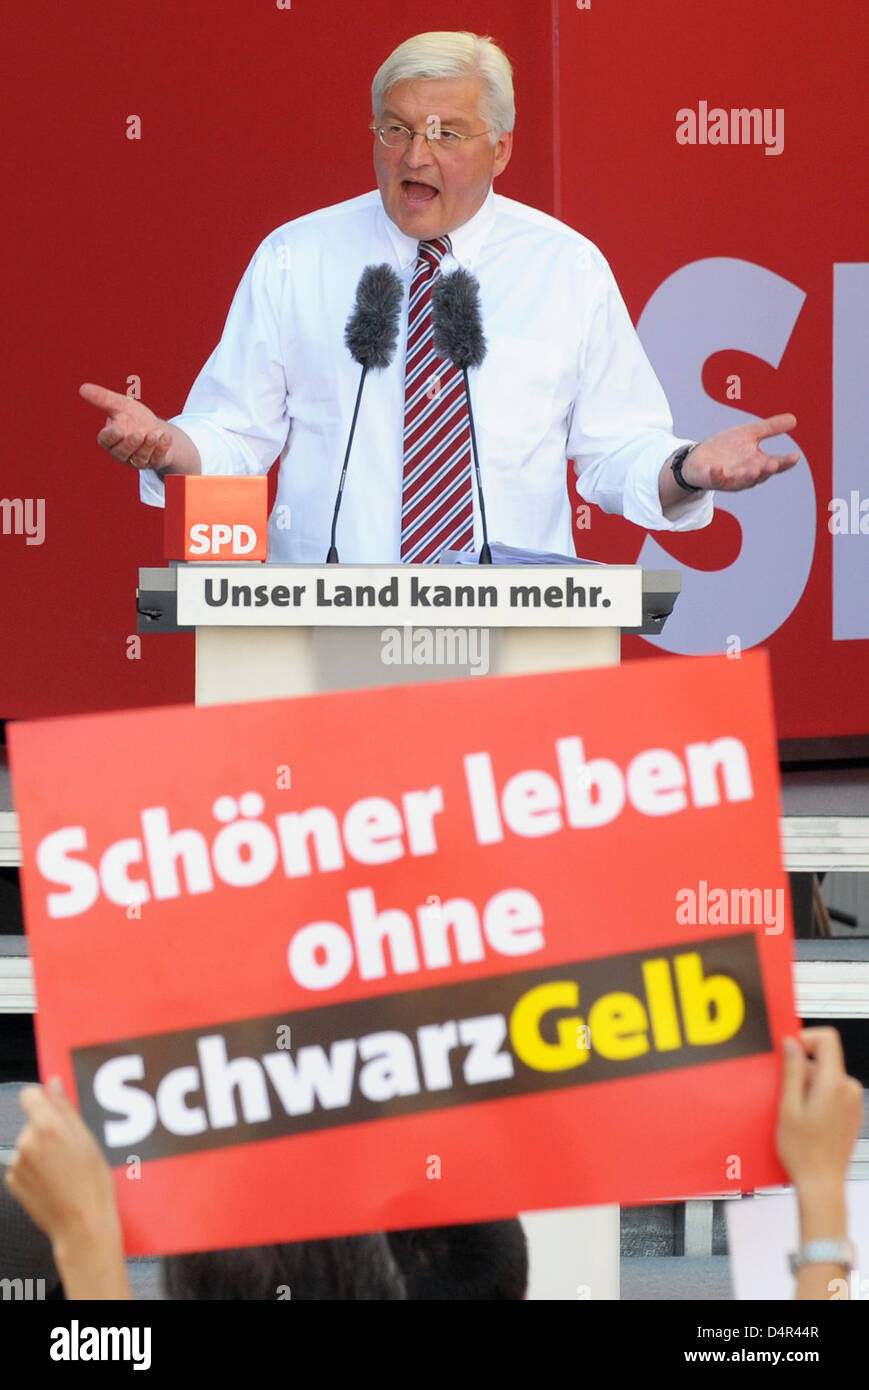 Chancellor candidate of the Social Democratic Party (SPD), Frank-Walter Steinmeier, holds a speech at an election campaign event in Dresden, Germany, 26 September 2009. The German federal elections are held on 27 September 2009. Photo: RALF HIRSCHBERGER Stock Photo